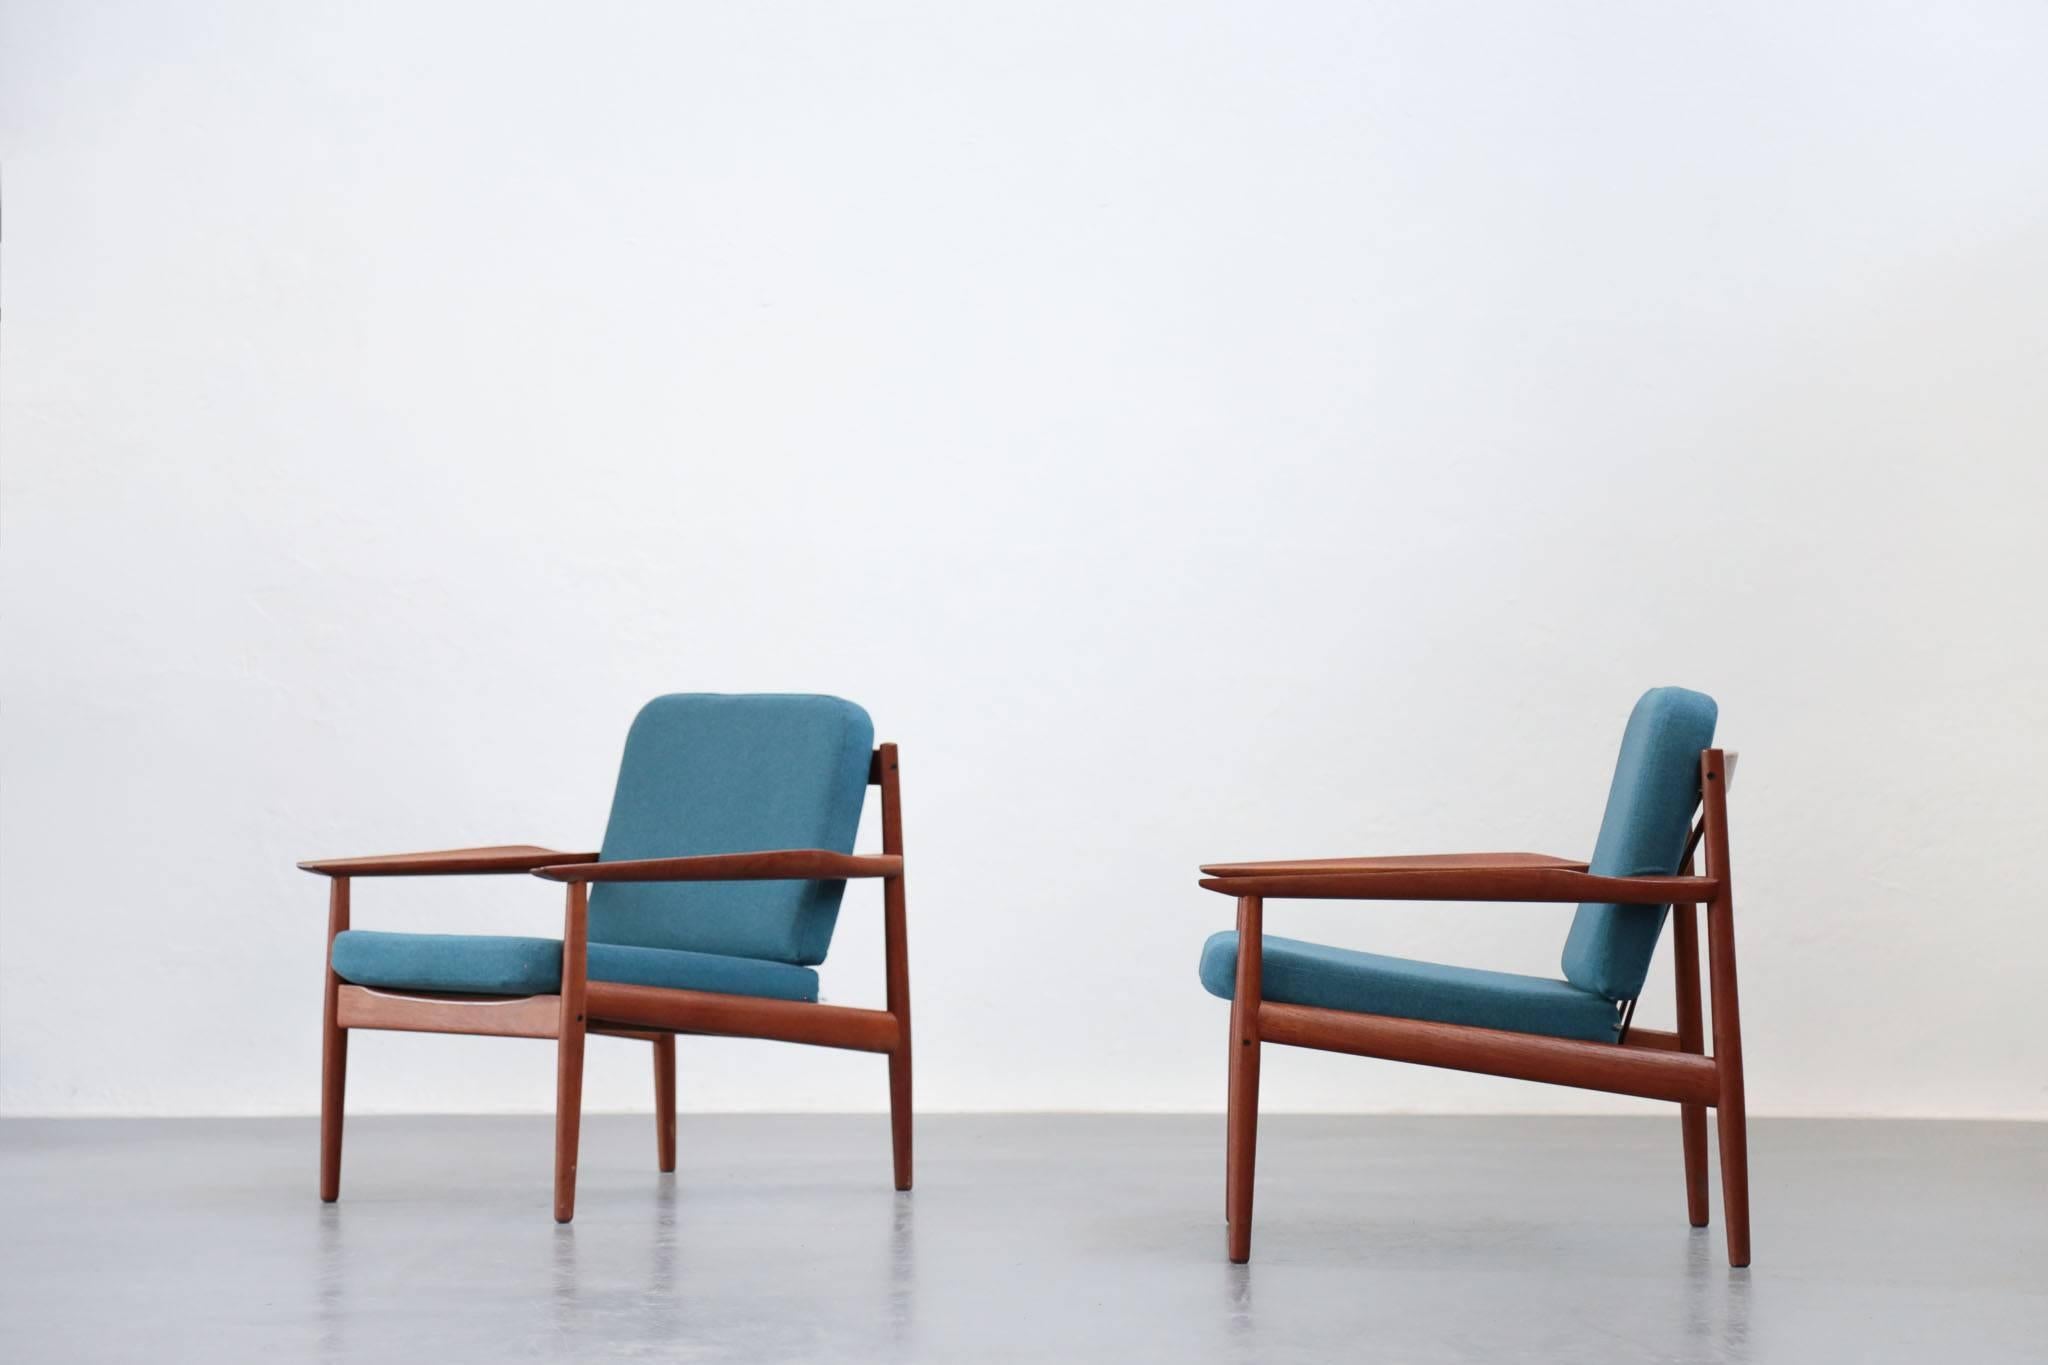 Pair of 1960s Arne Vodder easy chairs, teak frame with renewed upholstery.
Scandinavian Modern chairs manufactured by Glostrup (Denmark)
Excellent condition..